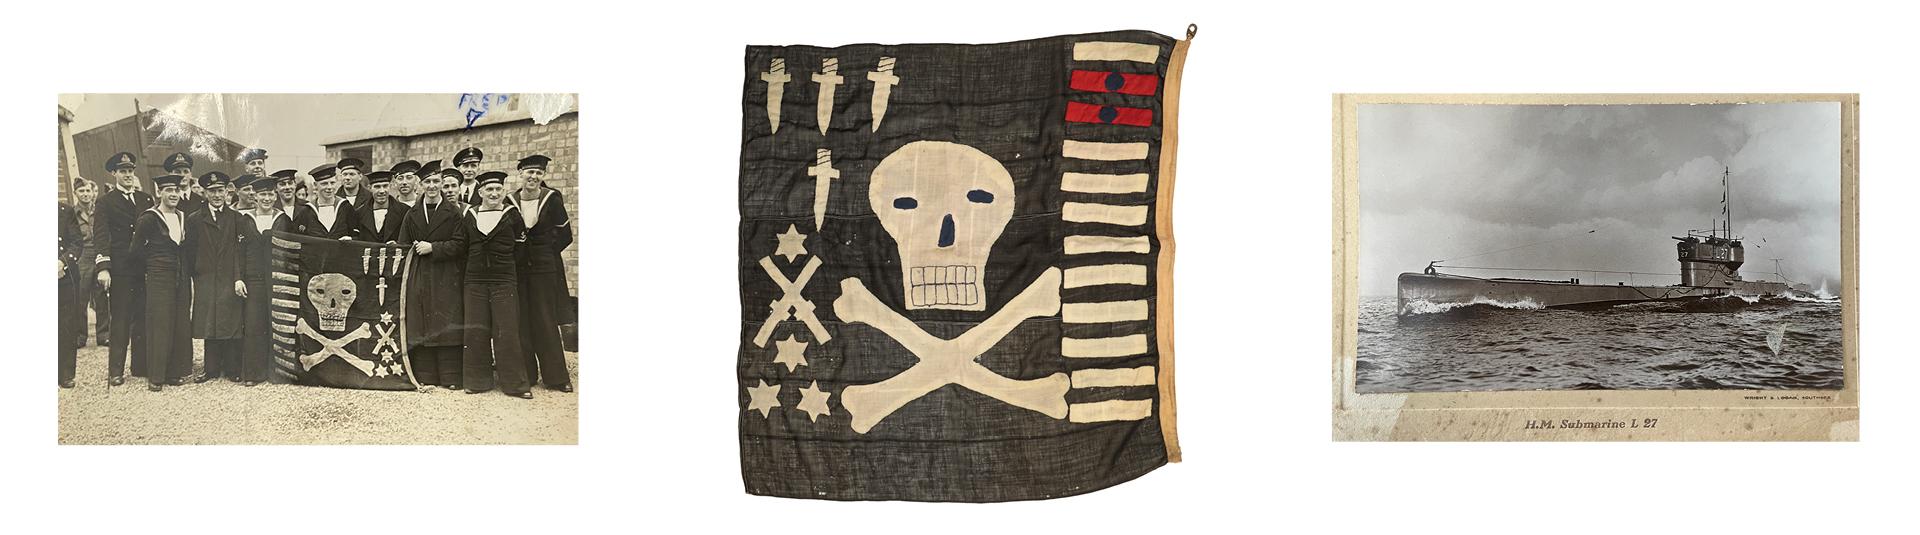 THE HISTORICALLY IMPORTANT 'JOLLY ROGER' FROM THE SUBMARINE HMS